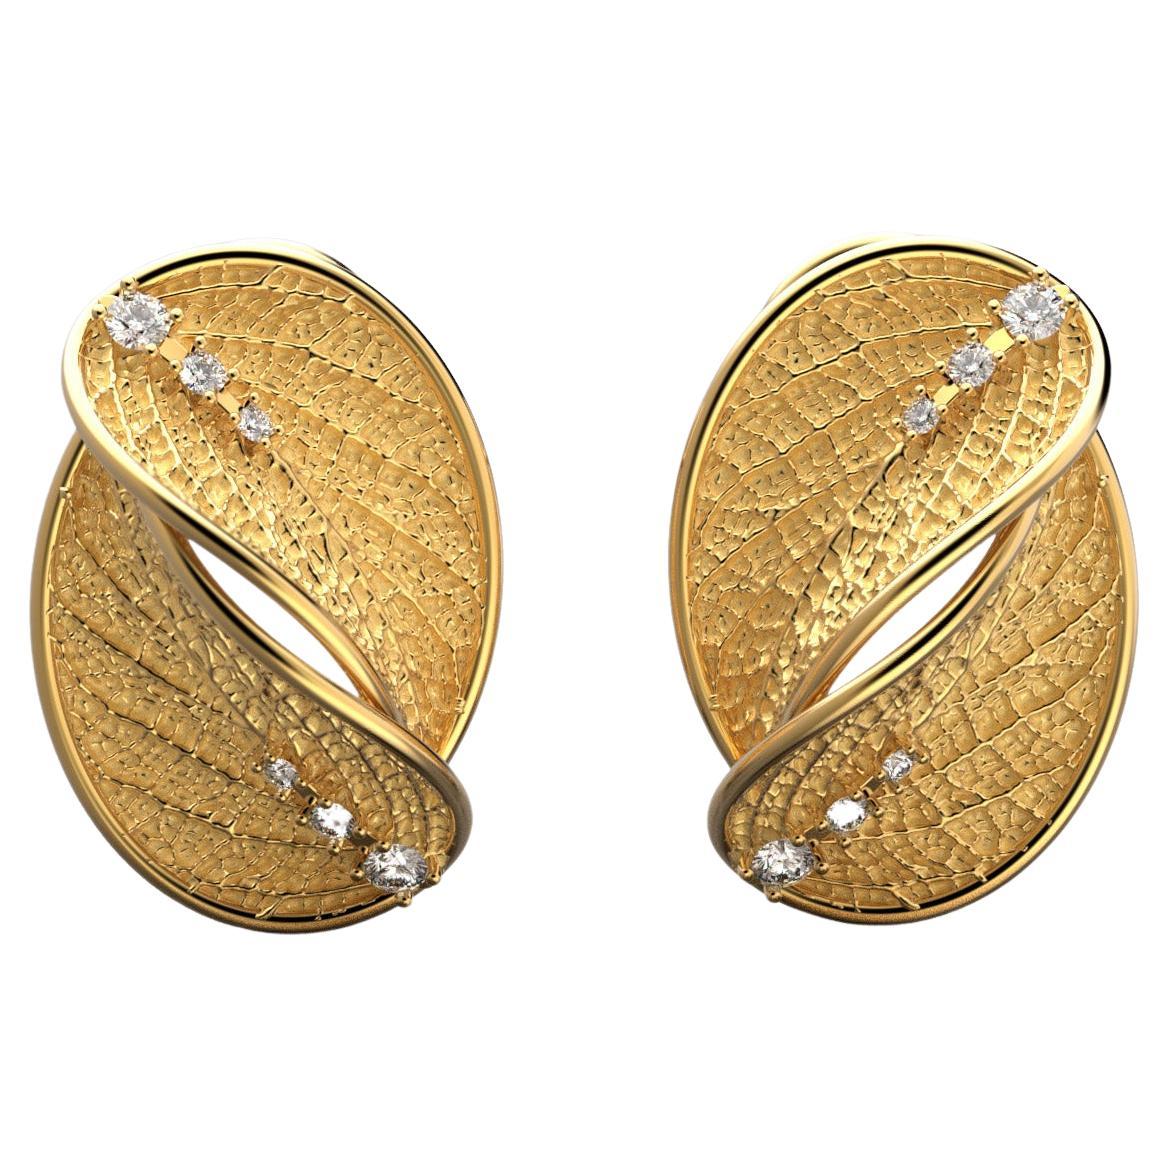 14k Gold Nature Inspired Diamond Stud Earrings with Leaf Design, Italian Jewelry